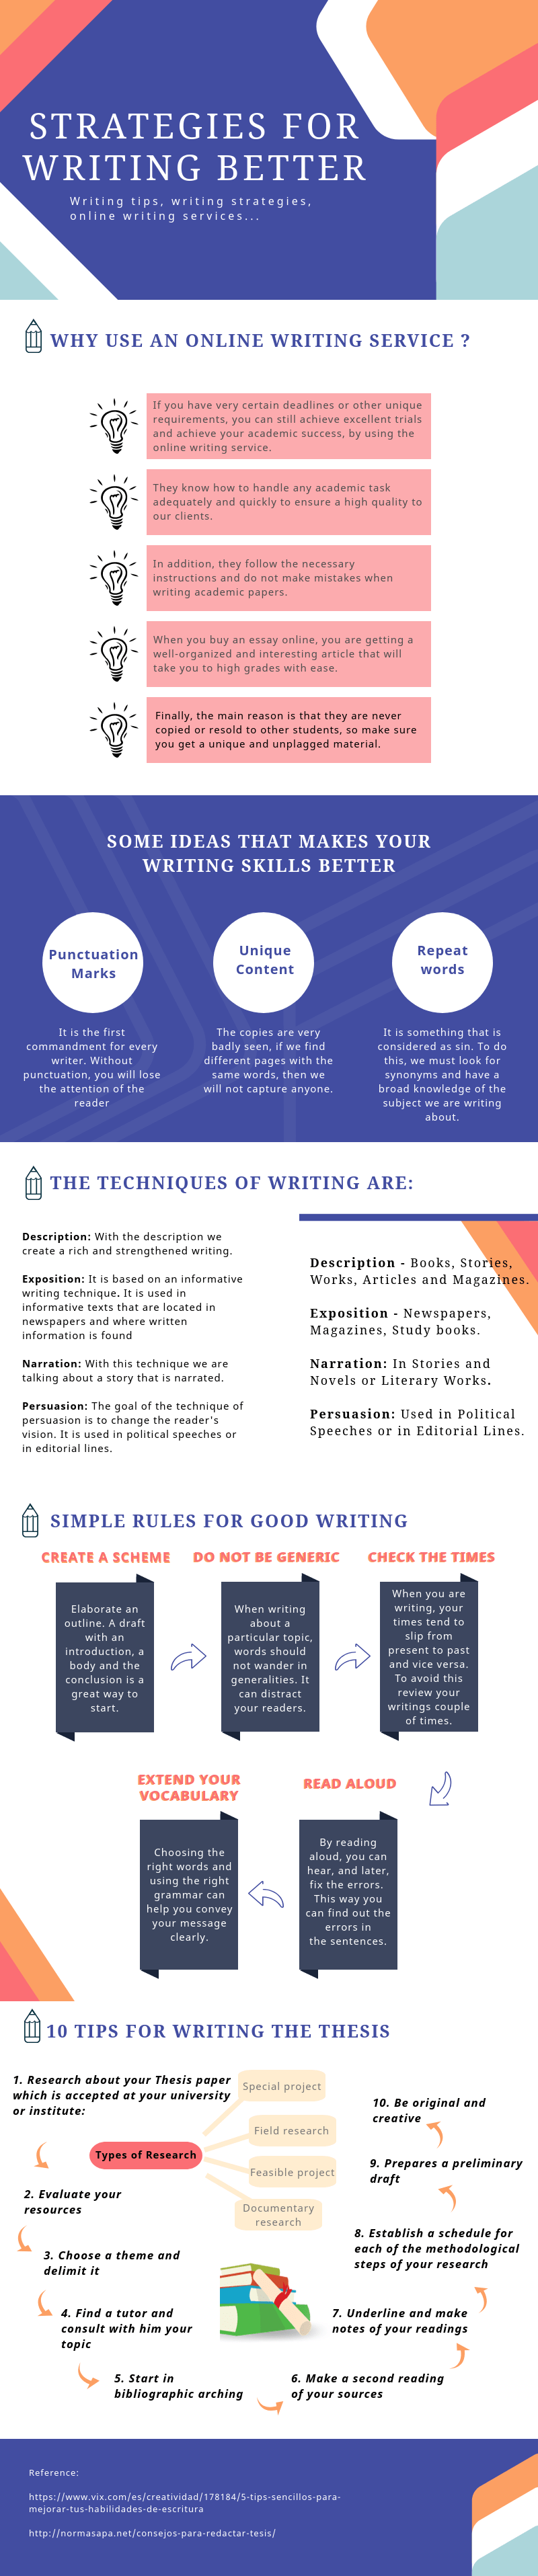 how to get better at writing